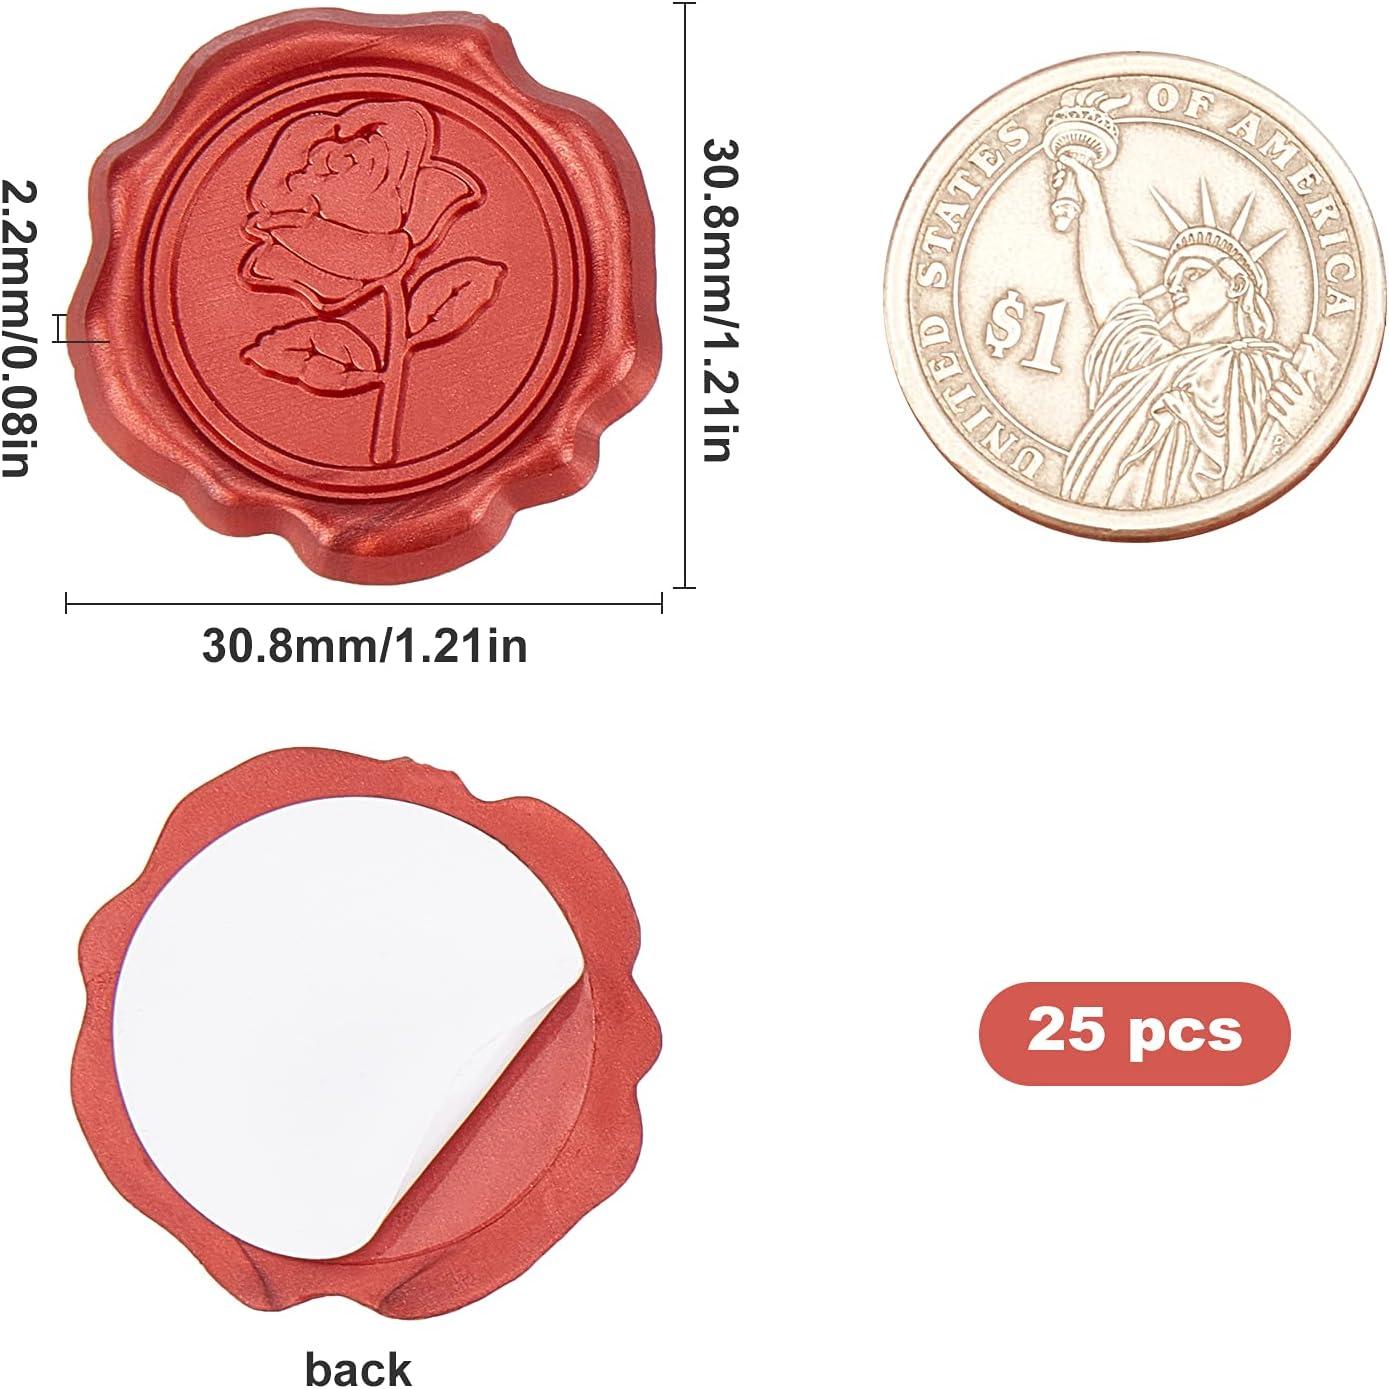 Adhesive Wax Seal Stickers 25PCS Red Rose Wax Seal Sticker for Envelopes  Decorative Stamp Stickers Envelope Stickers for Wedding Invitation Craft  Scrapbook Party Gift Grapping 